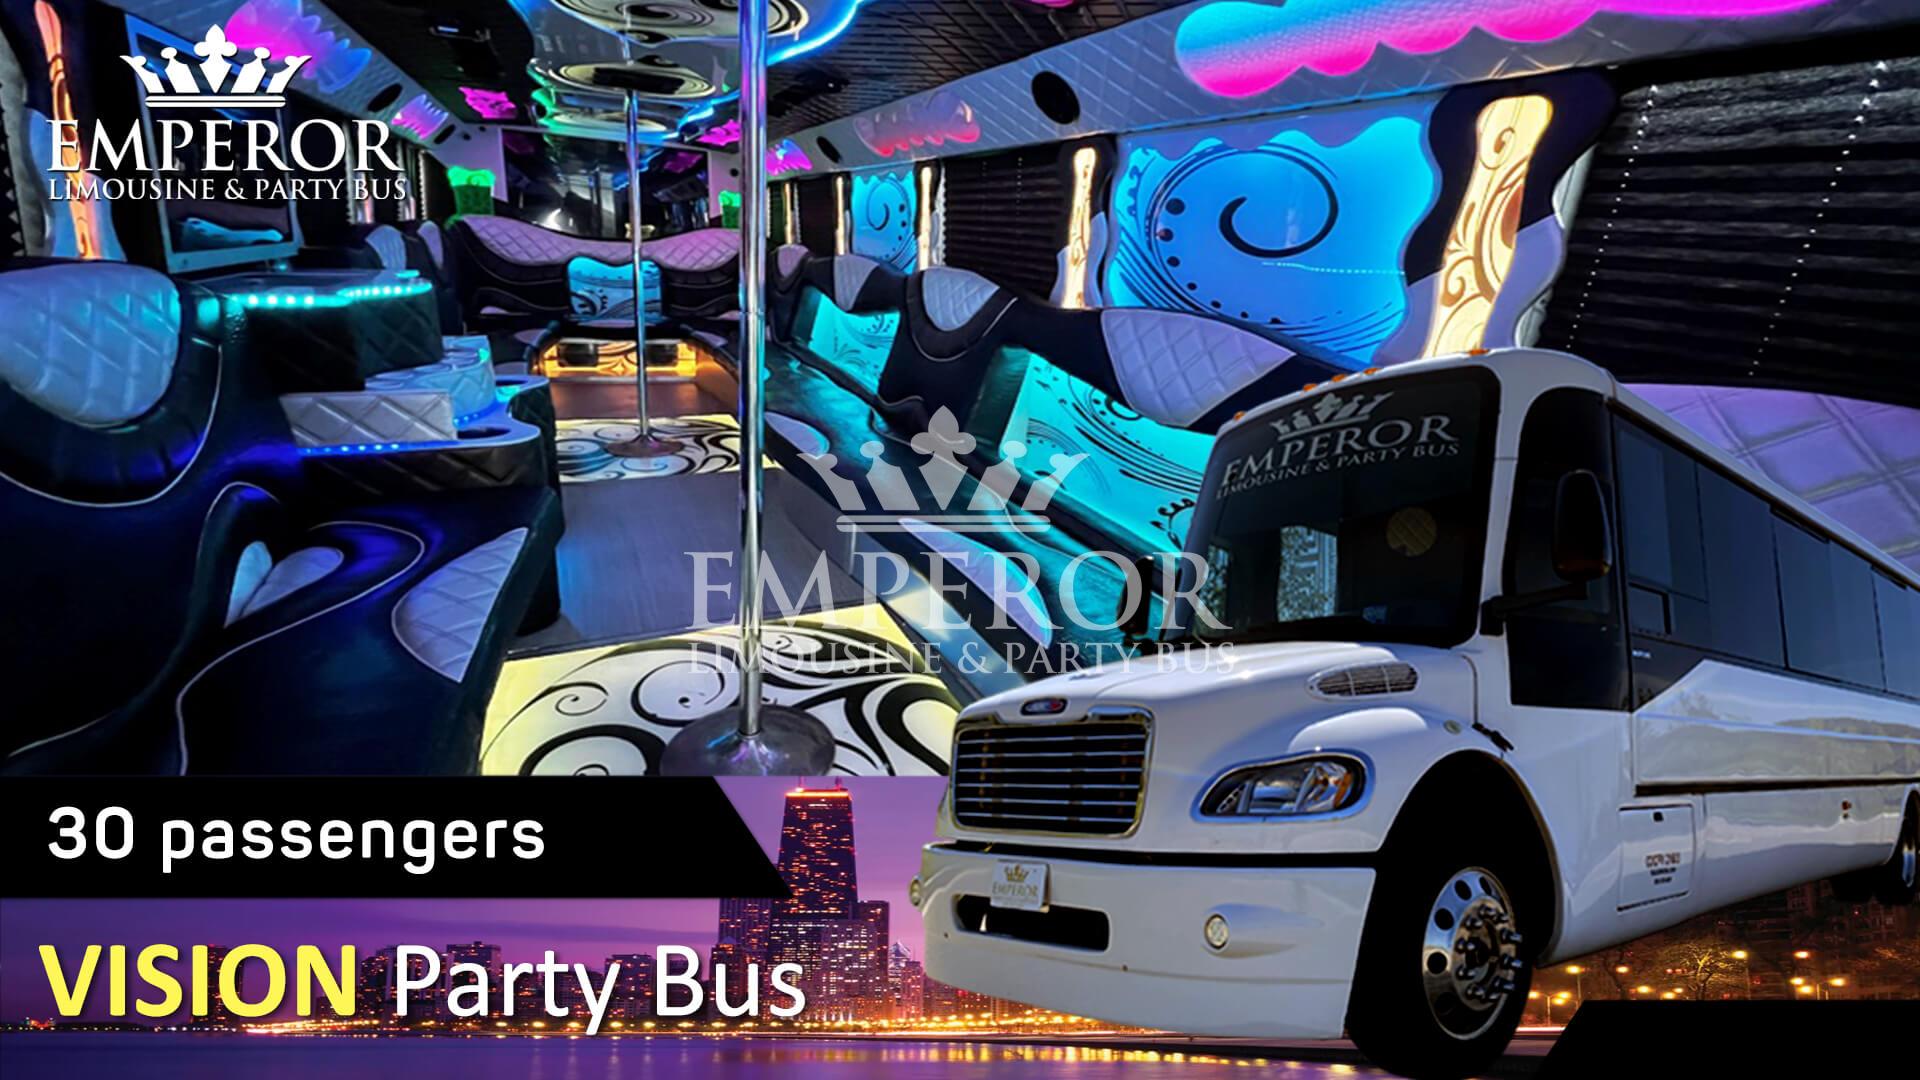 Bradley party bus - Vision Edition